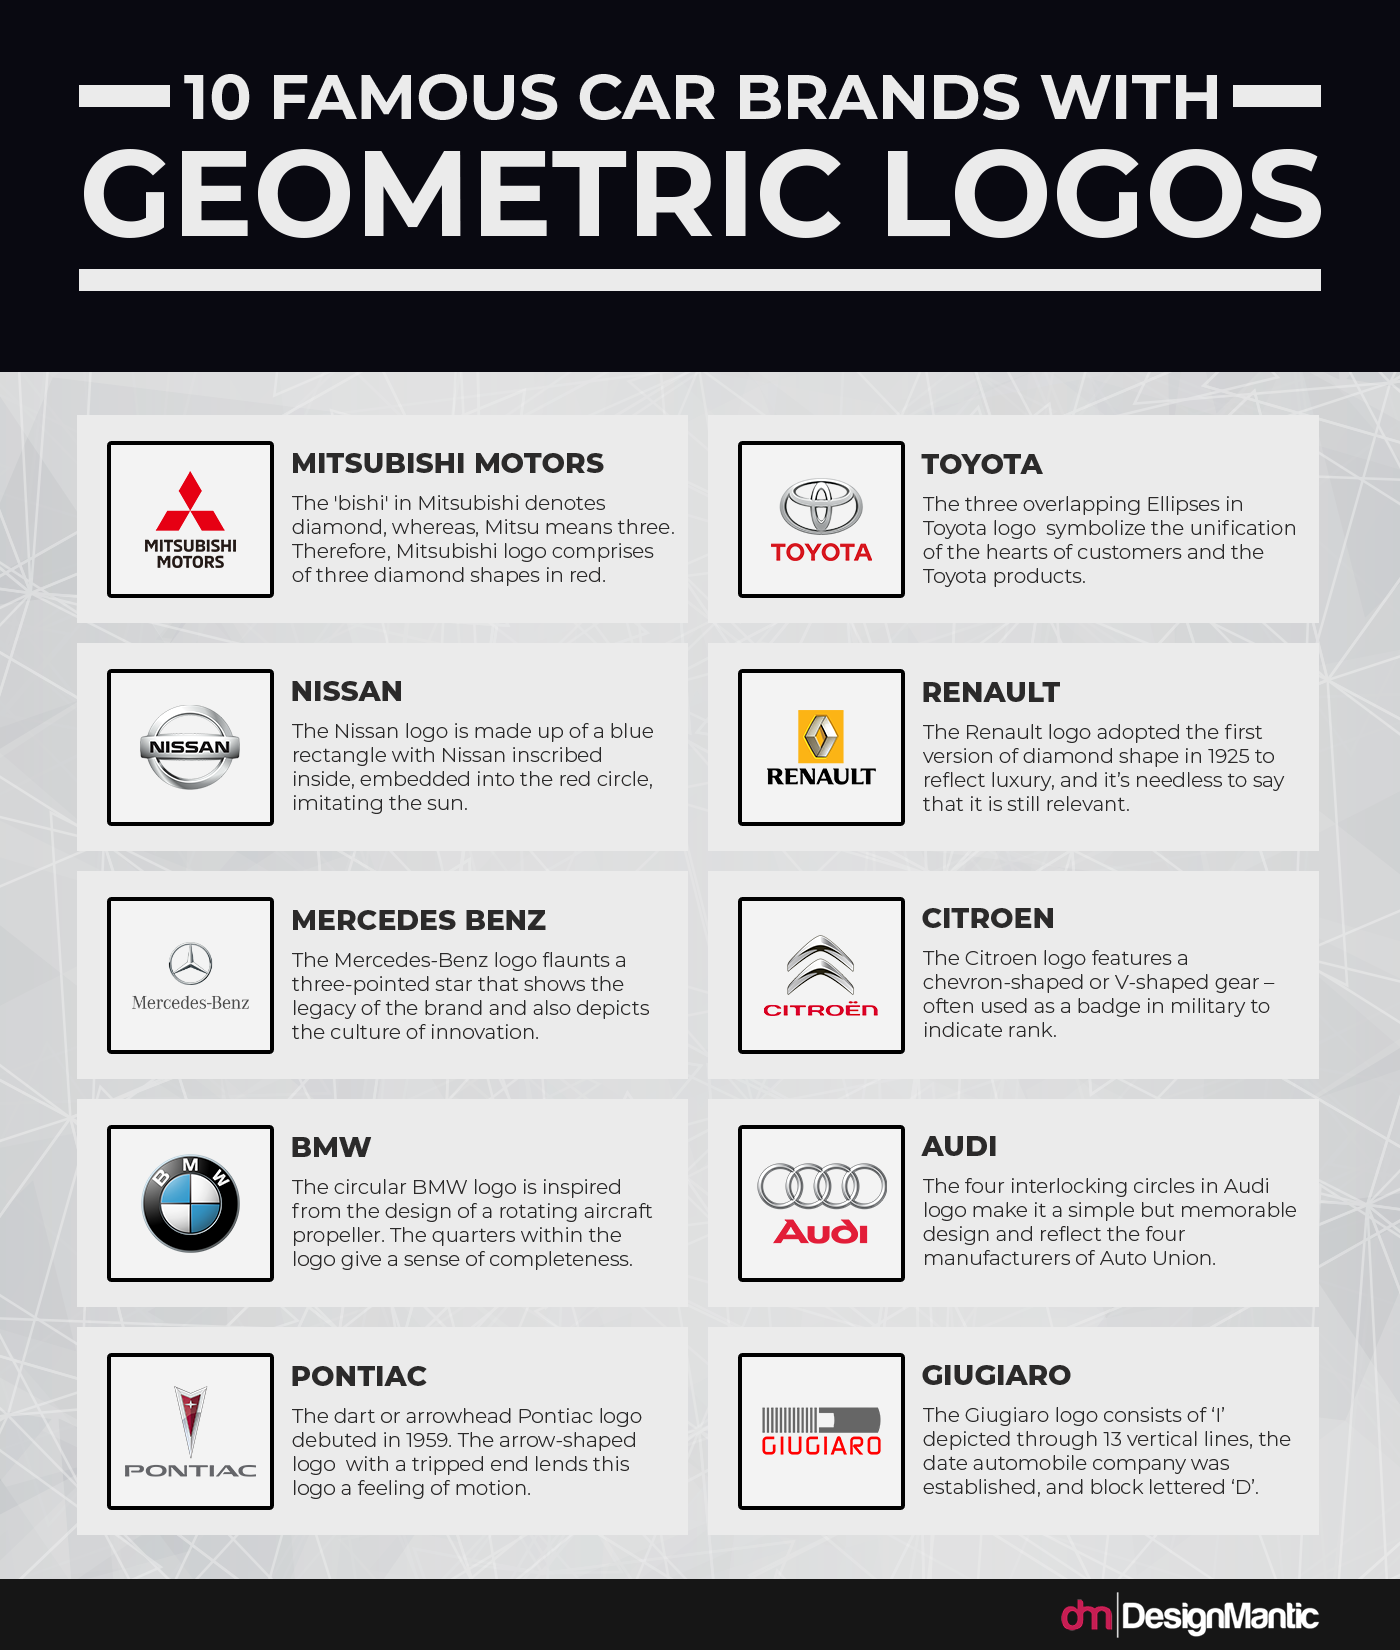 automotive logos starting with d